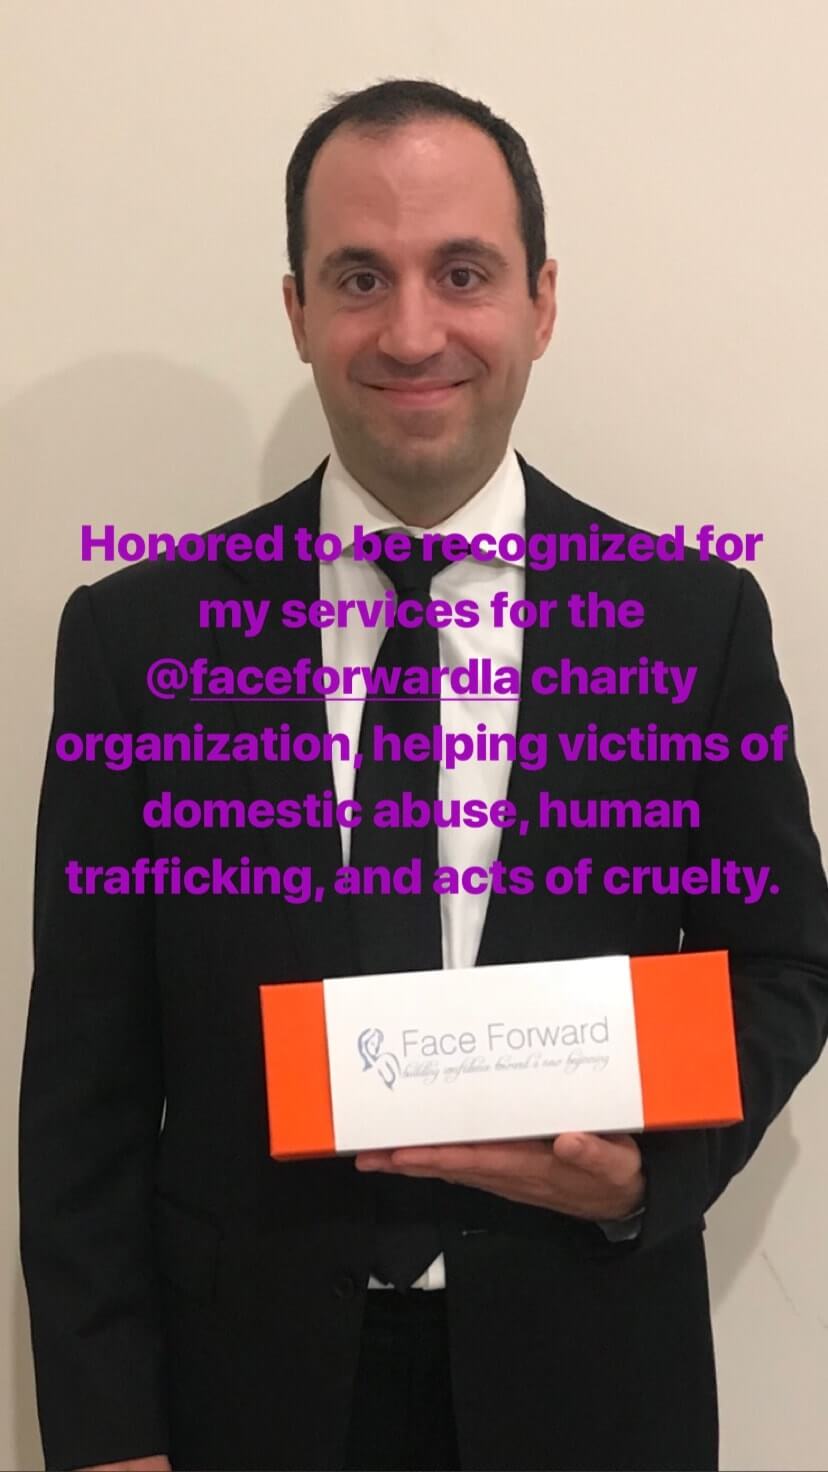 Dr Taban was recipient of FaceForward Charity Recognition Award for his contribution to this organization who helps patients of domestic abuse and acts of cruelty, with pro bono eyelid and facial reconstructive surgery.